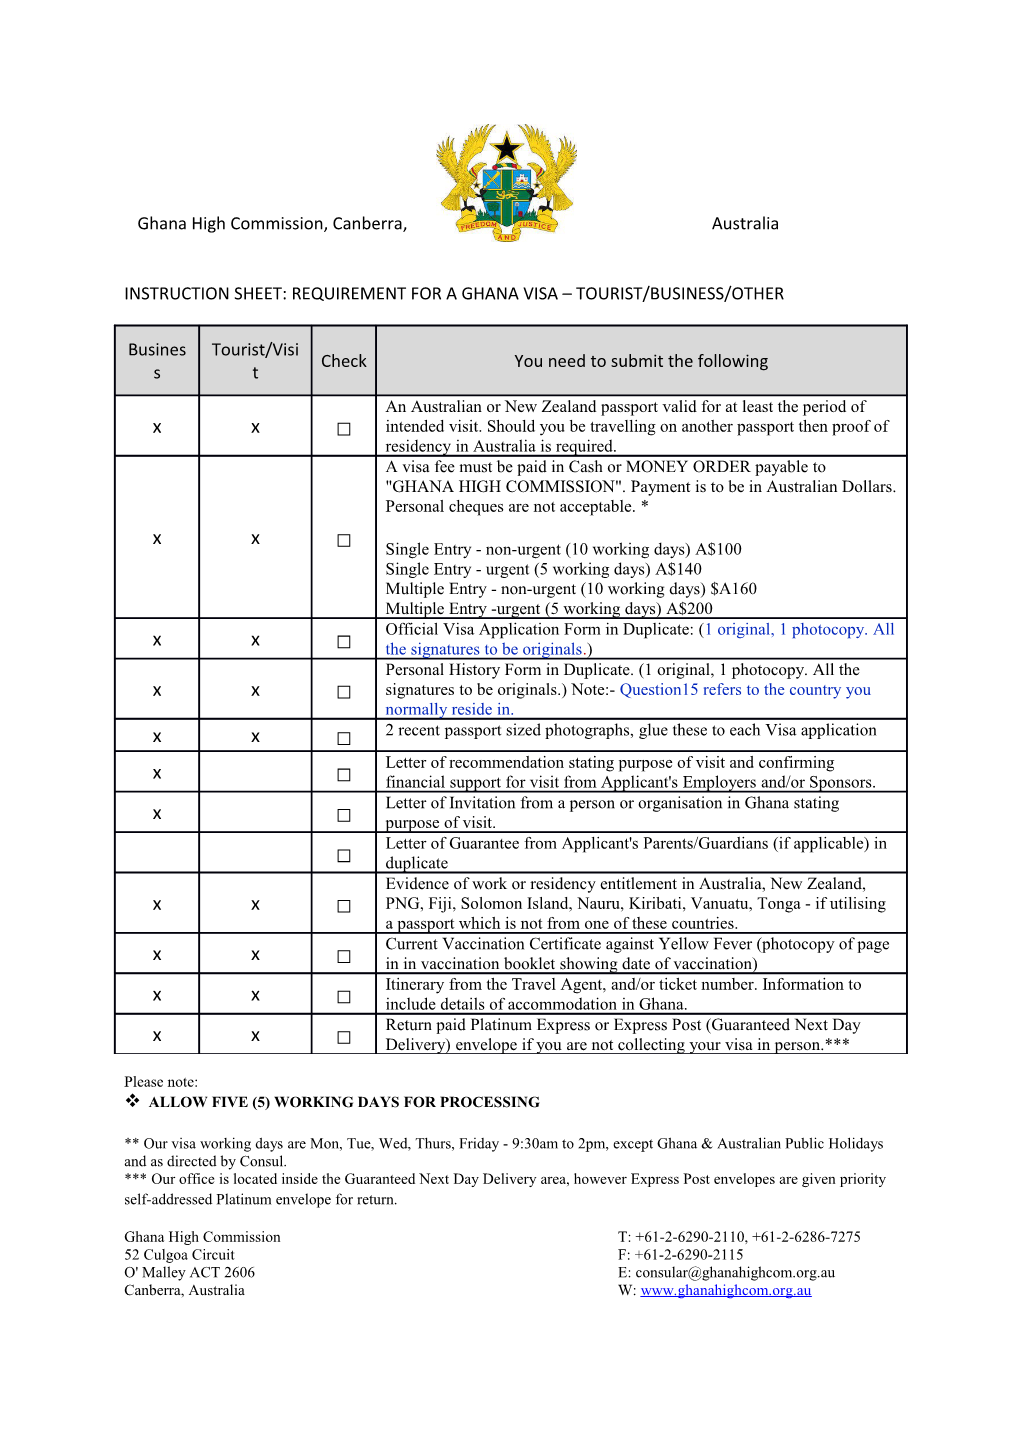 Instruction Sheet: Requirement for a Ghana Visa Tourist/Business/Other